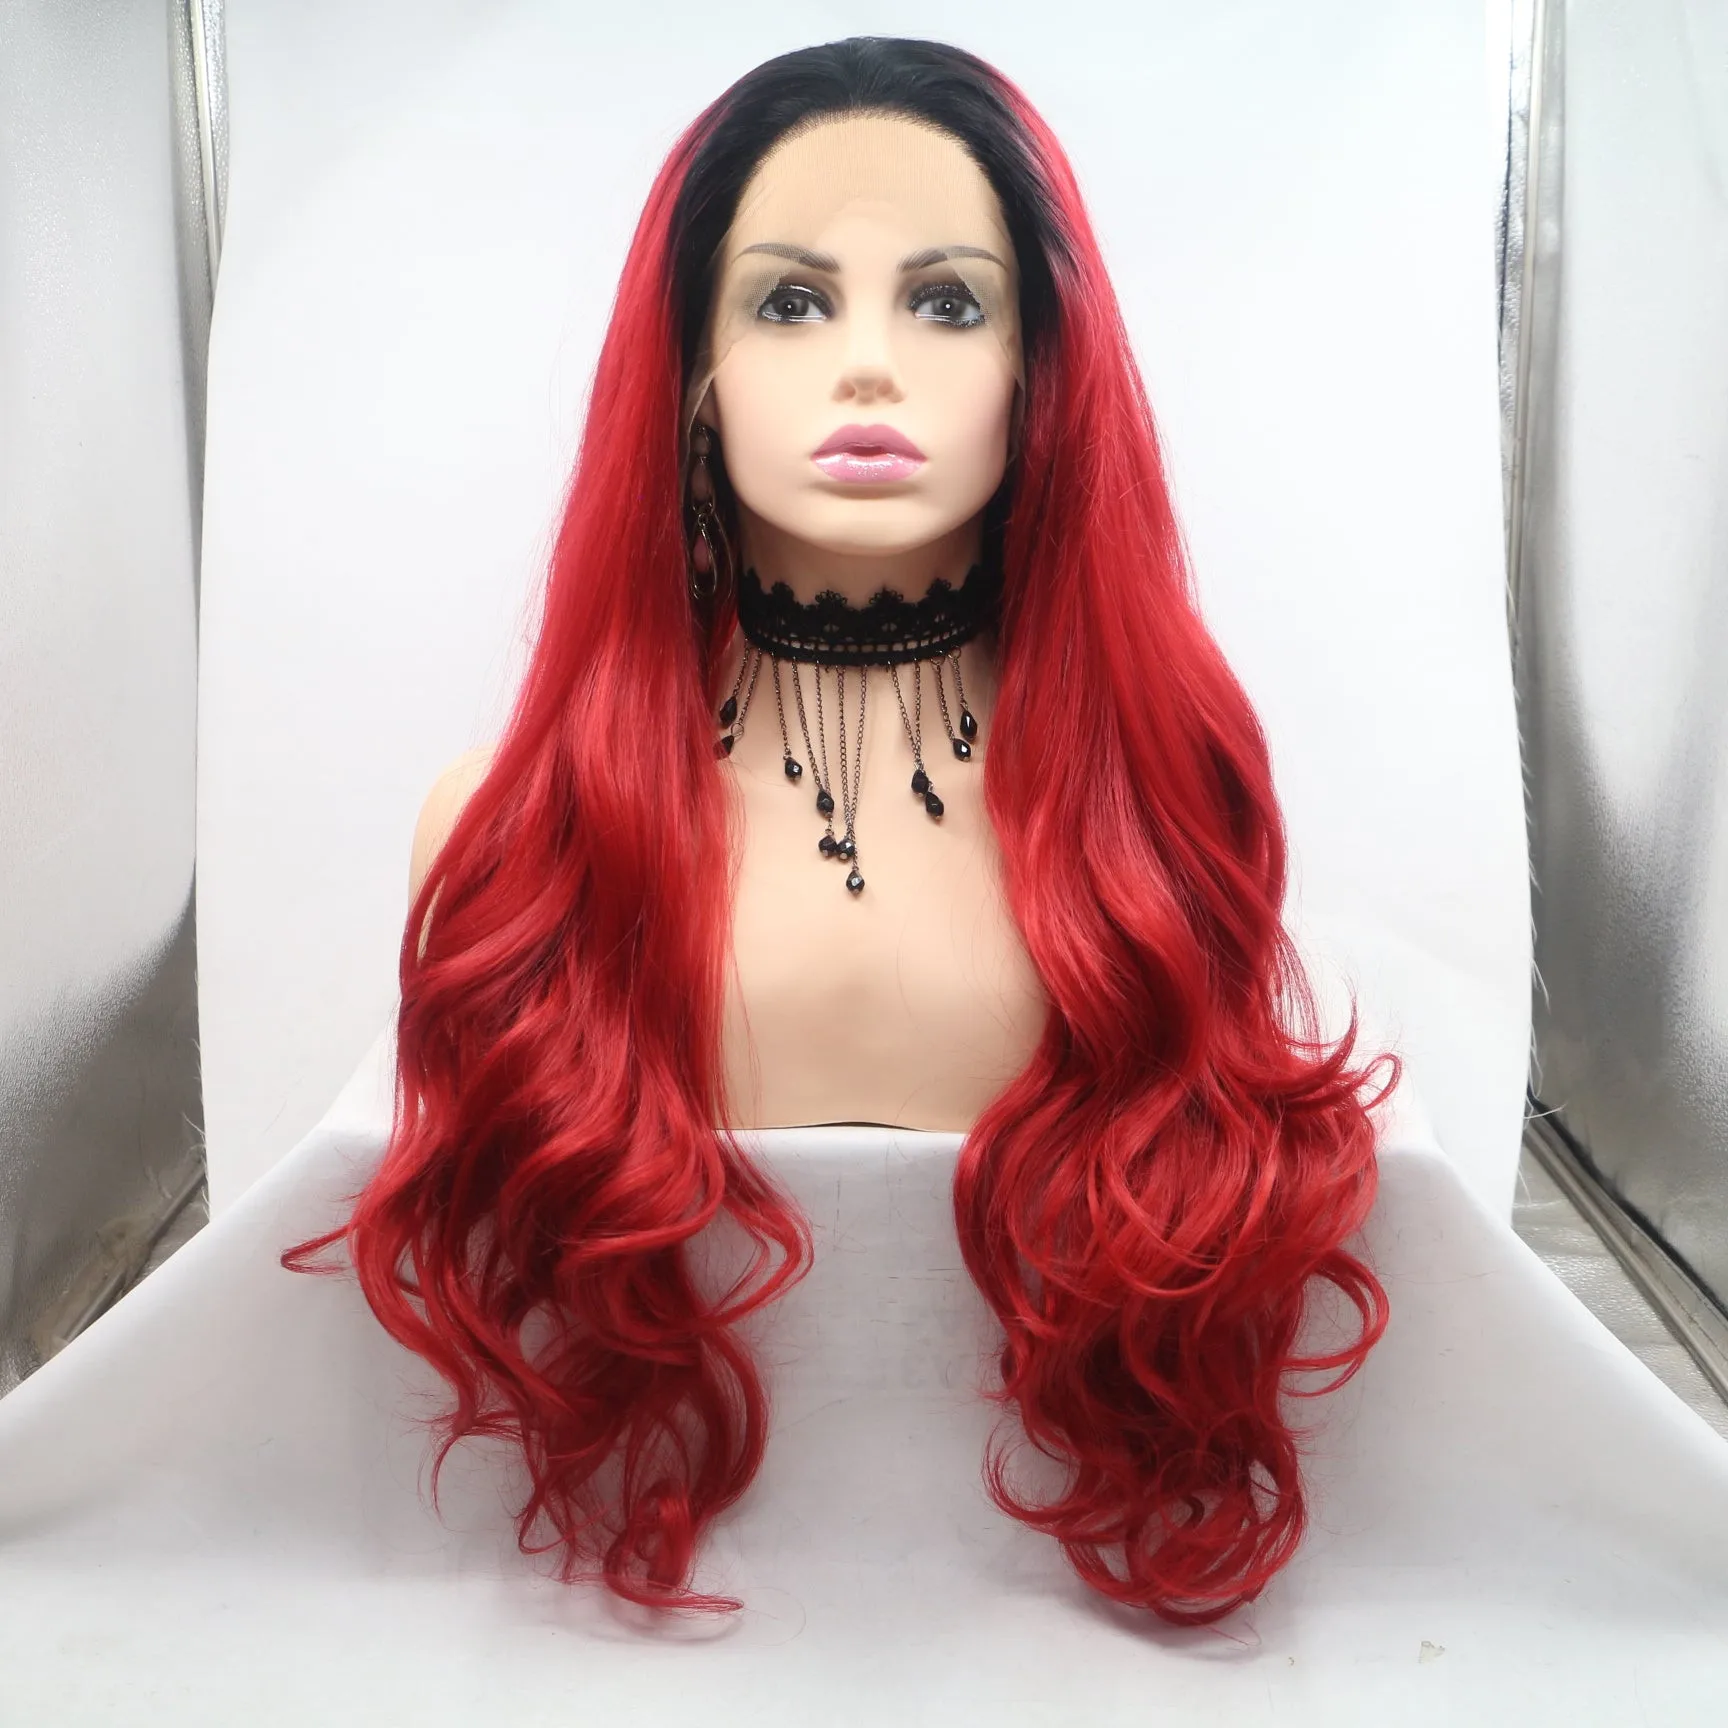 Costume Women Wigs Black Root Red Body Wave Straight Long Lace Front High Heat Resistant Fiber Synthetic Hair Wigs